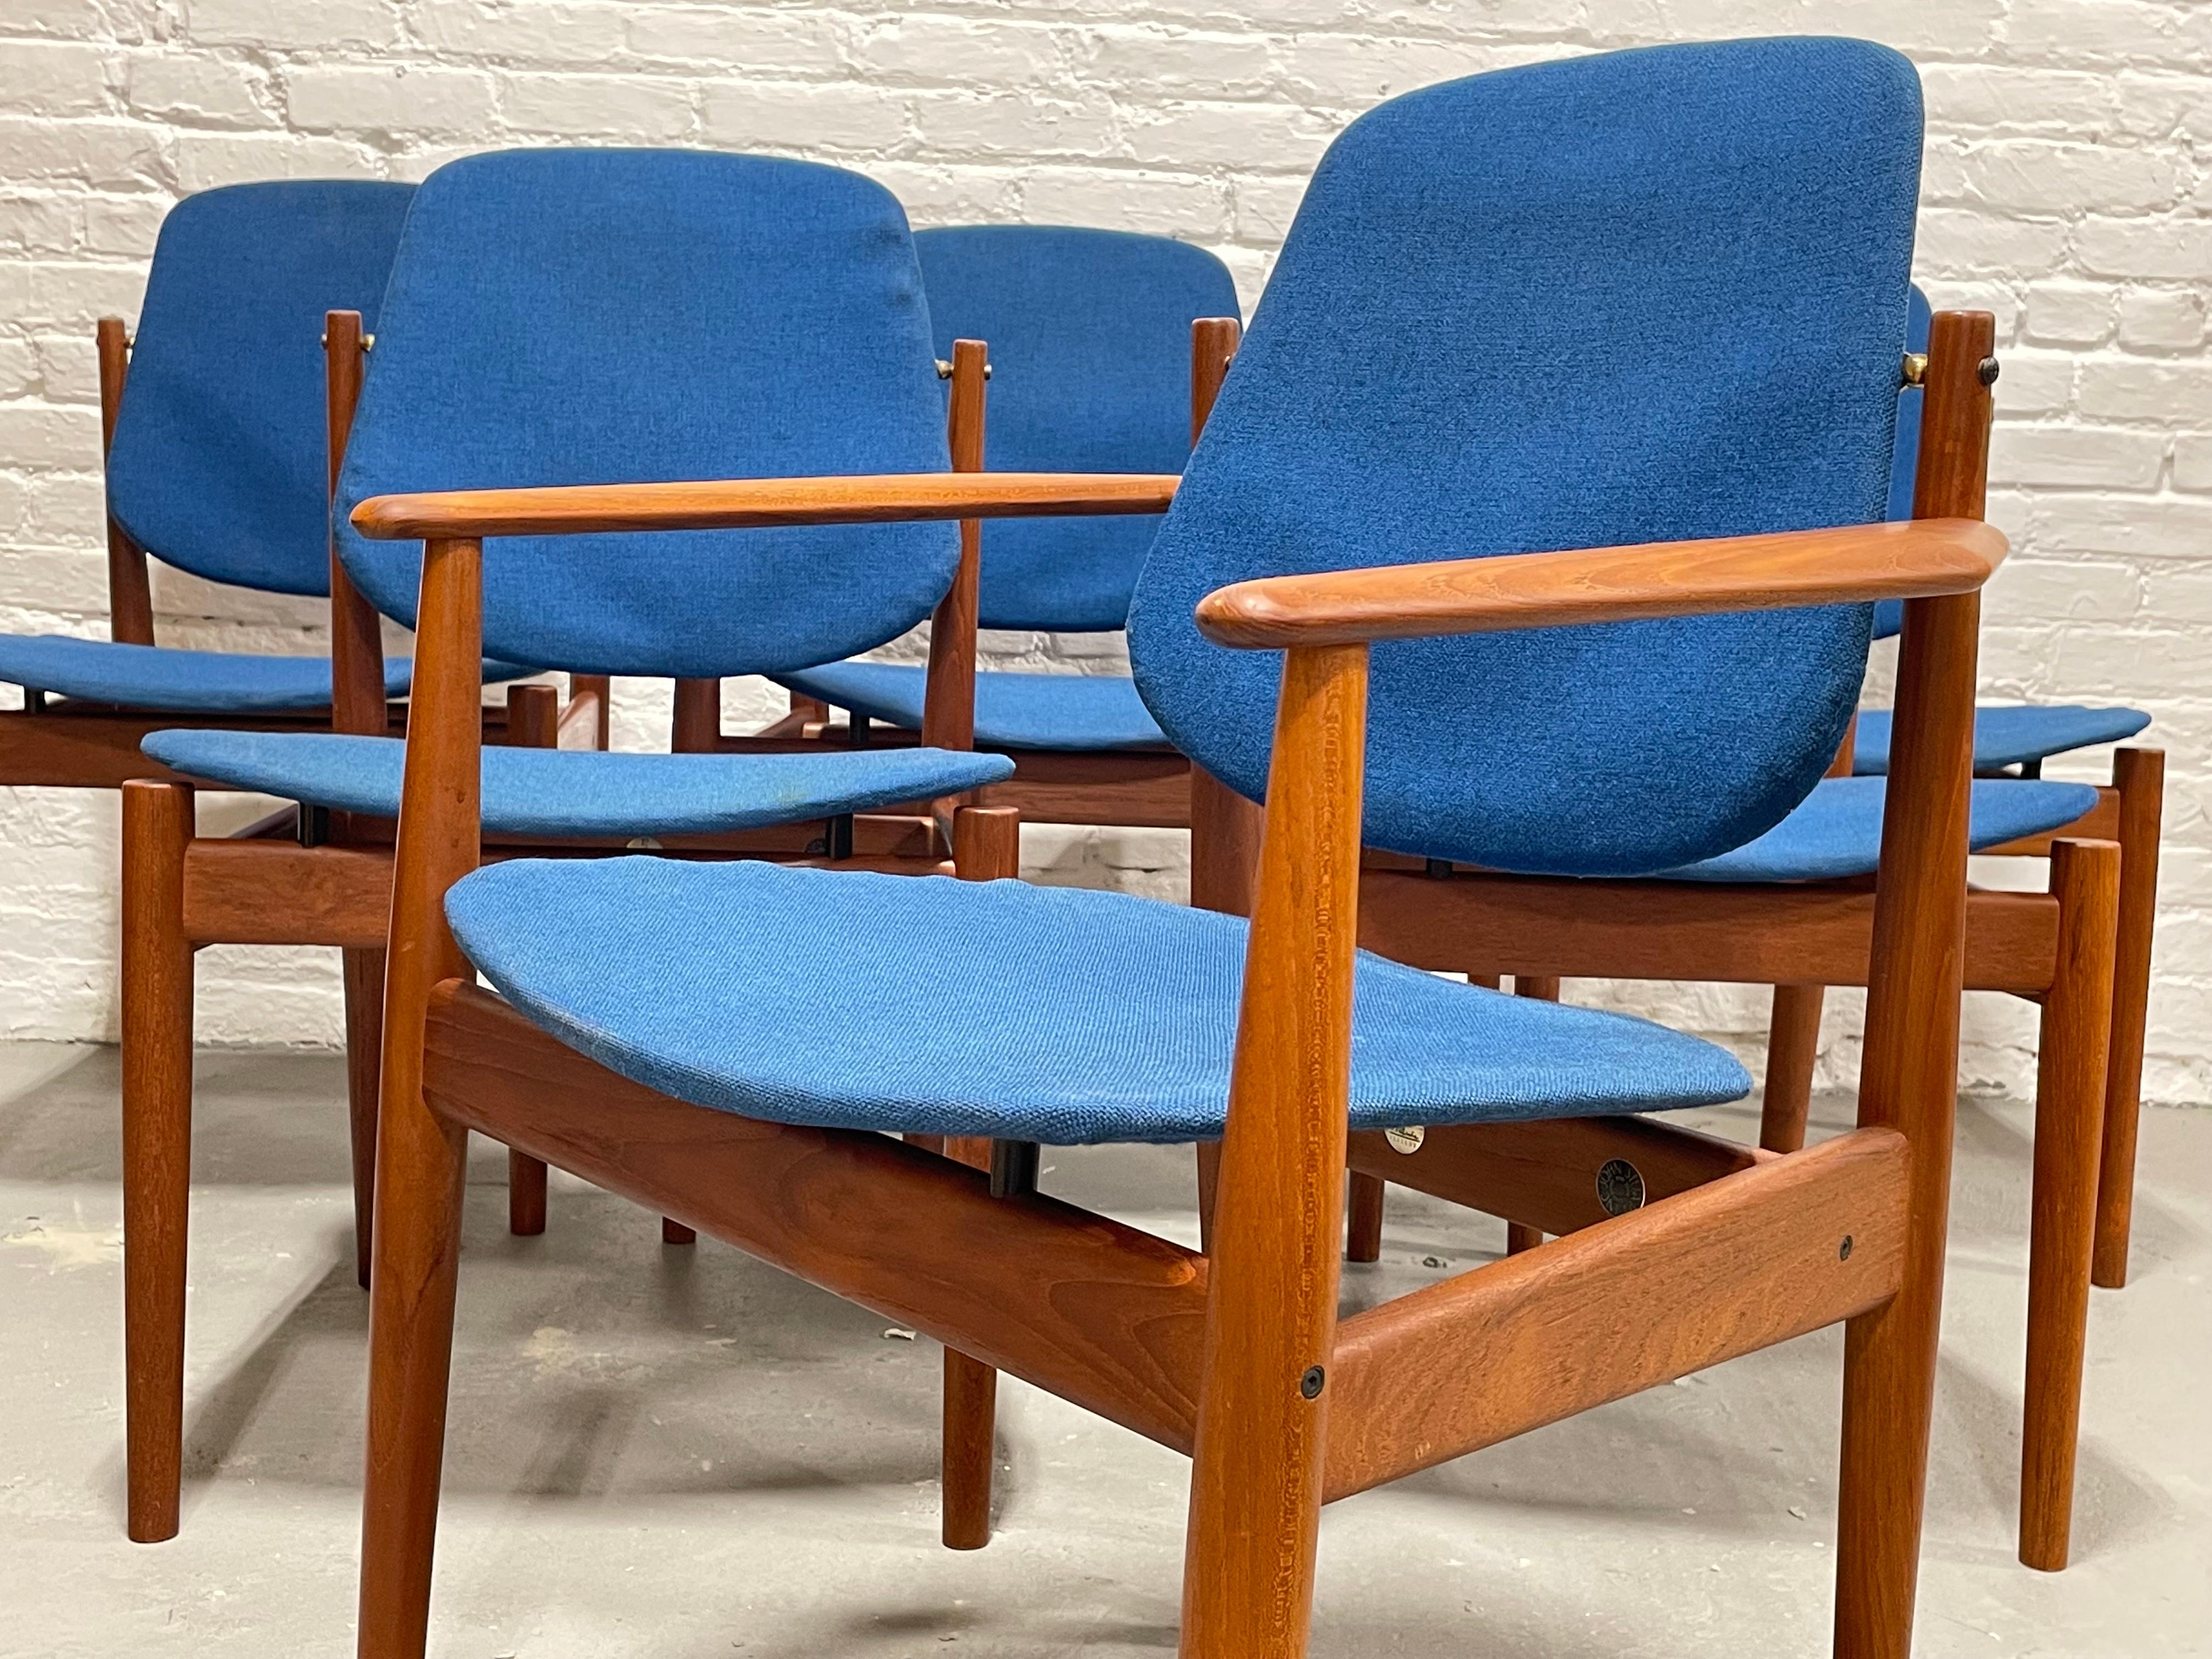 Midcentury Danish Teak Dining Chairs by Arne Vodder for France & Daverkosen In Good Condition For Sale In Weehawken, NJ